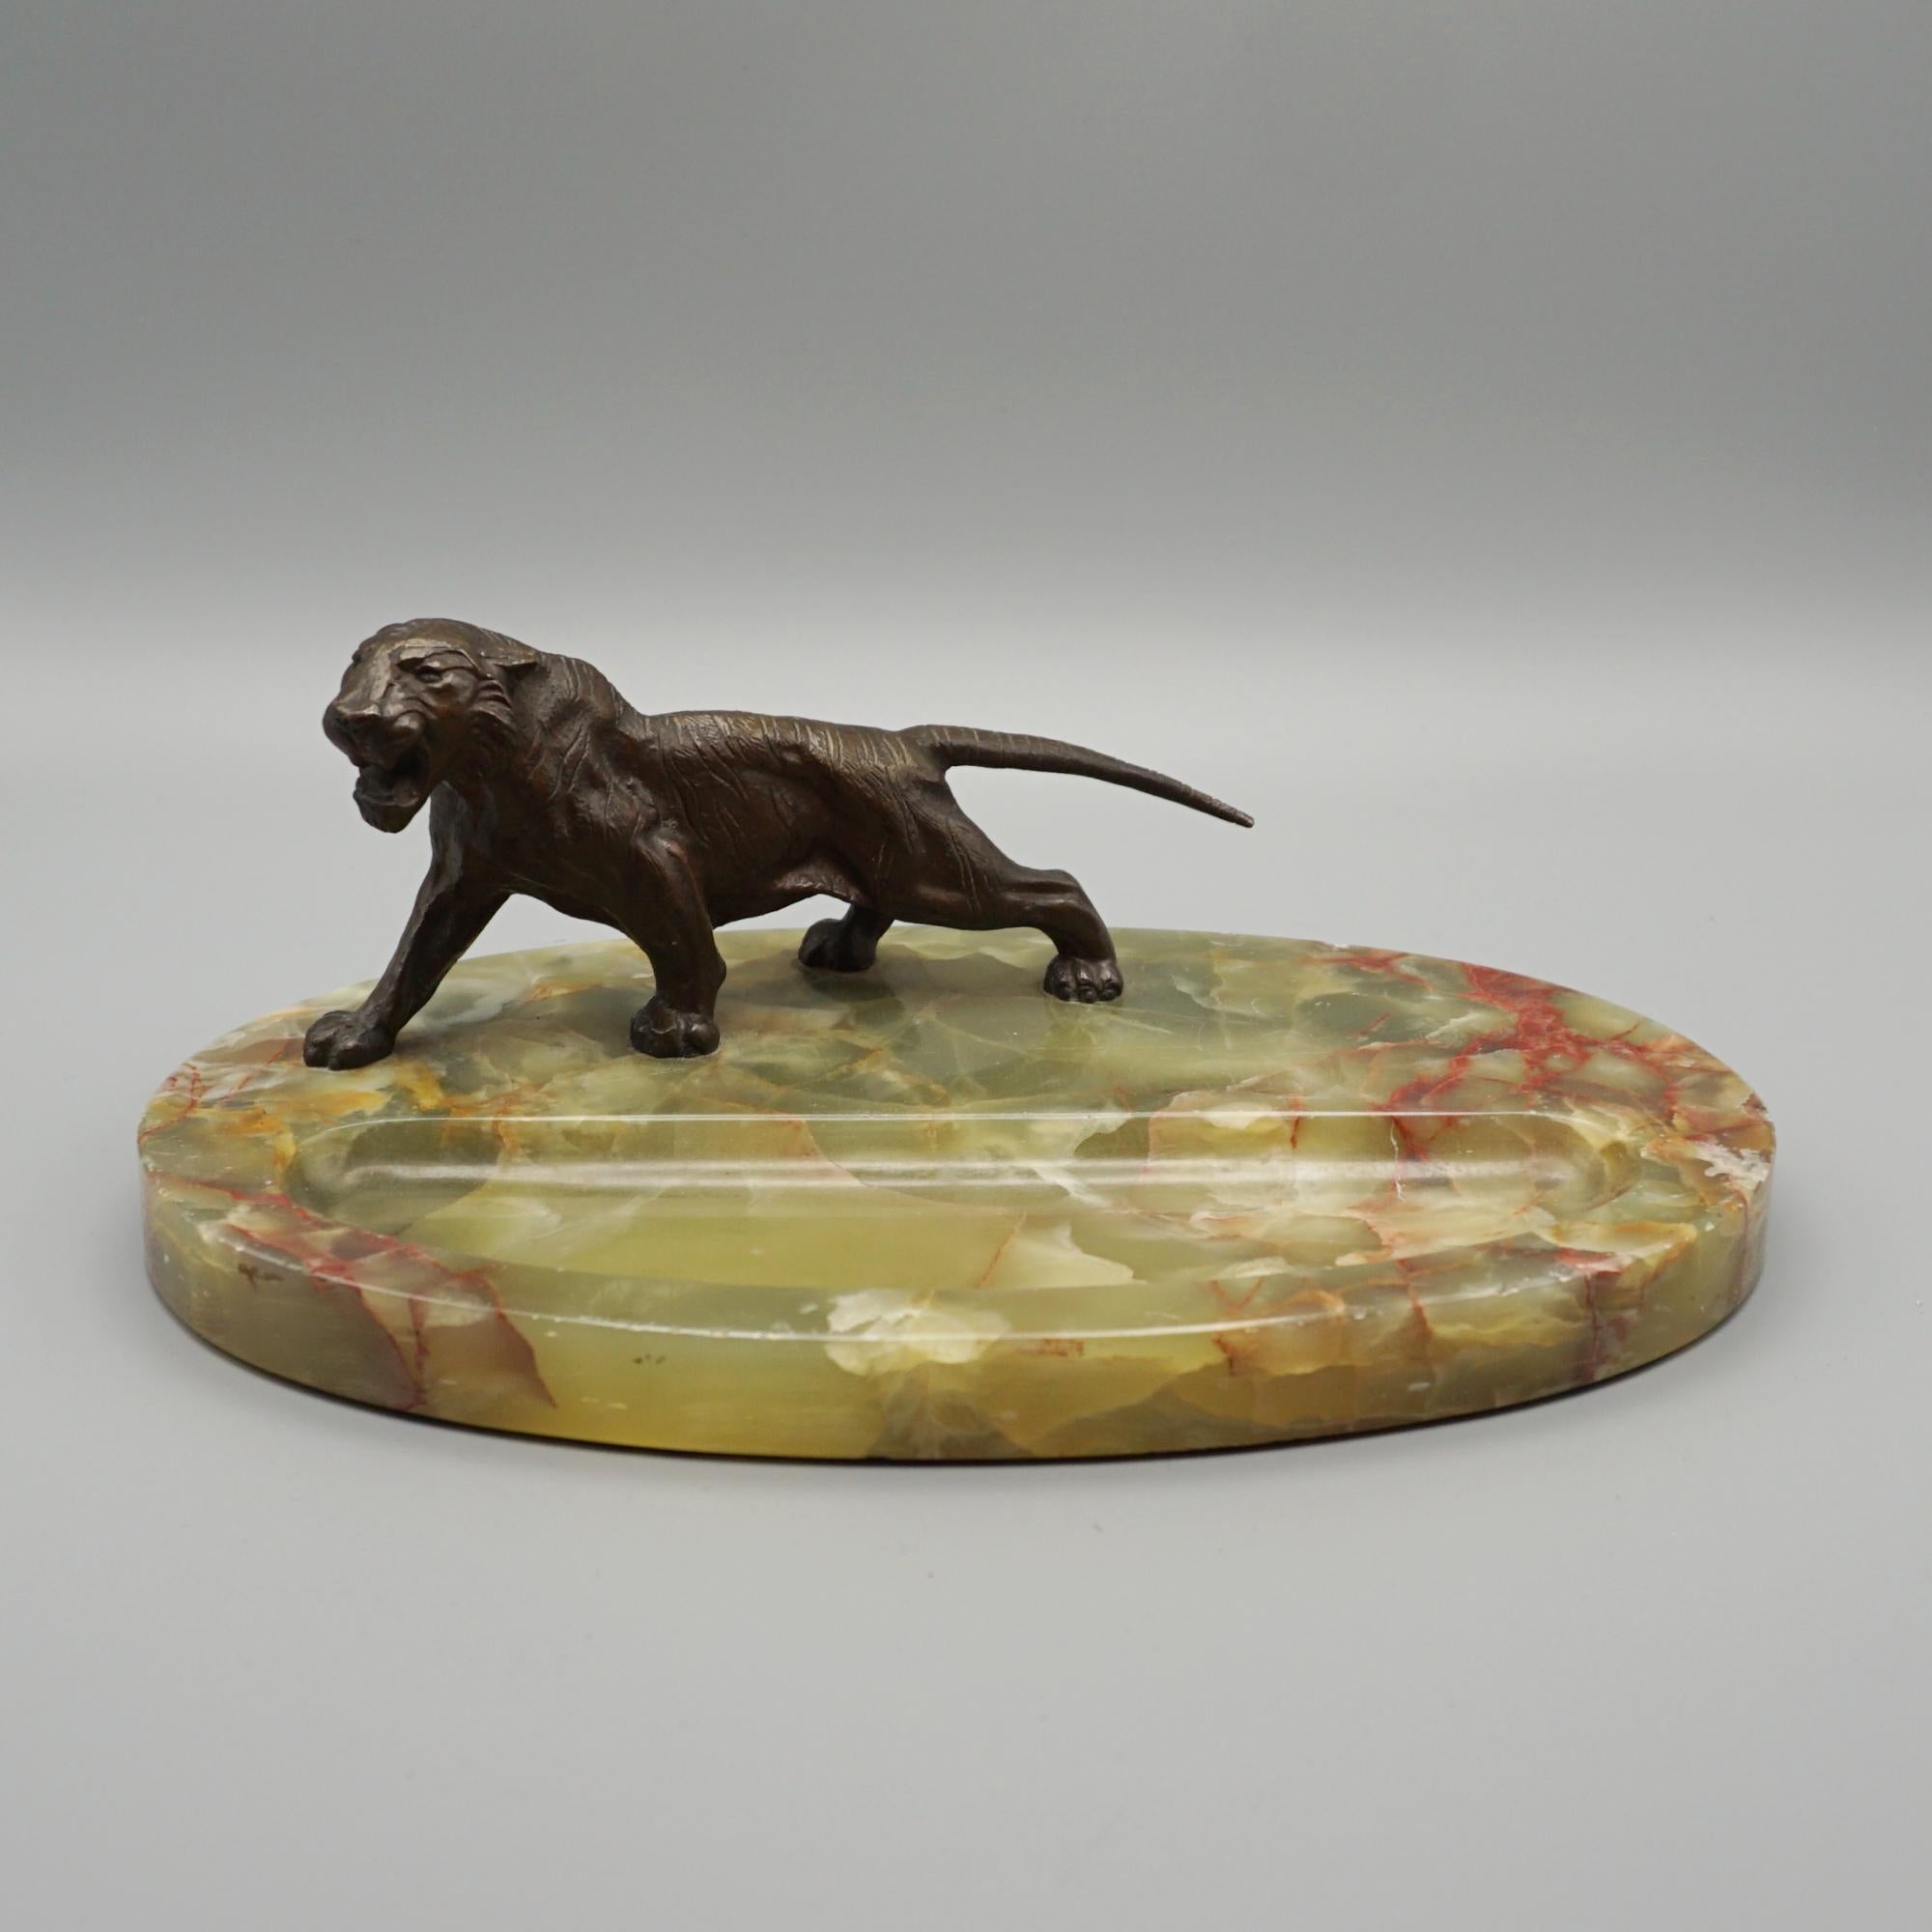 An Art Deco Desk Tidy/ Pin Tray. Bronze tiger mounted ob an oval onyx base. Retailed by Asprey of London 

Dimensions: H 8cm W 16.5cm D 25cm 

Origin: English 

Date: Circa 1925 

Item Number: 1804243